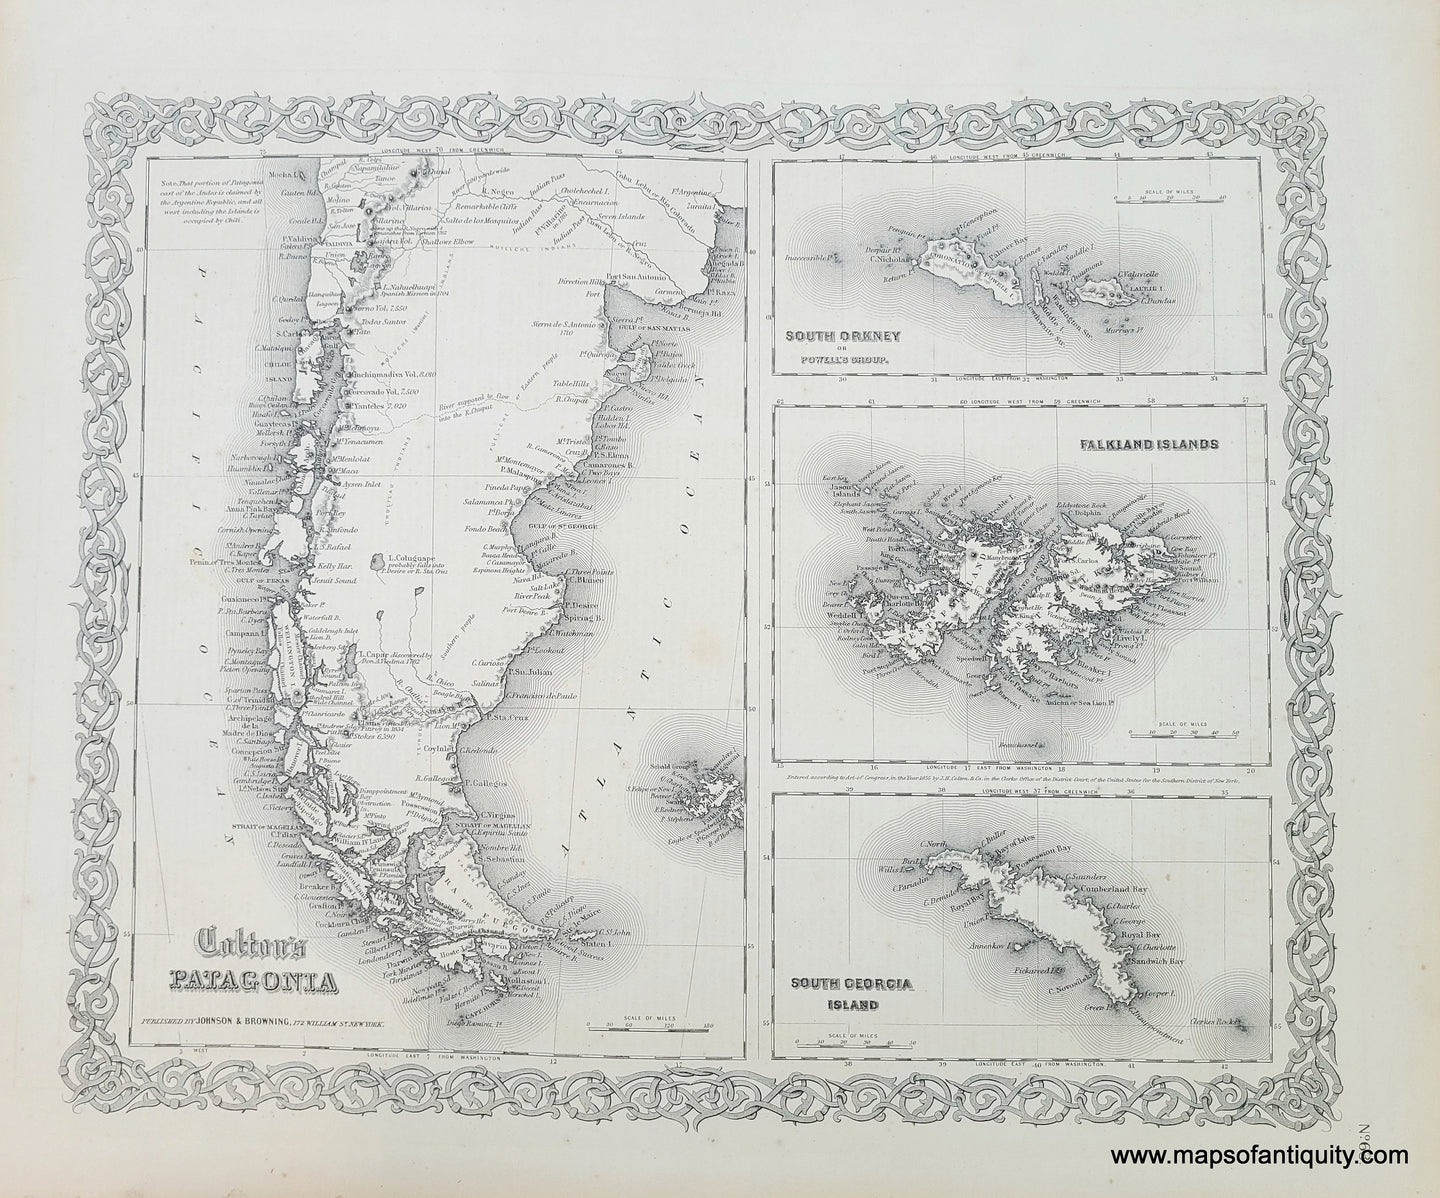 Antique-Map-black and white Colton's-Patagonia-South-Orkney-or-Powell's-Group-Falkland-Islands-and-South-Georgia-Island